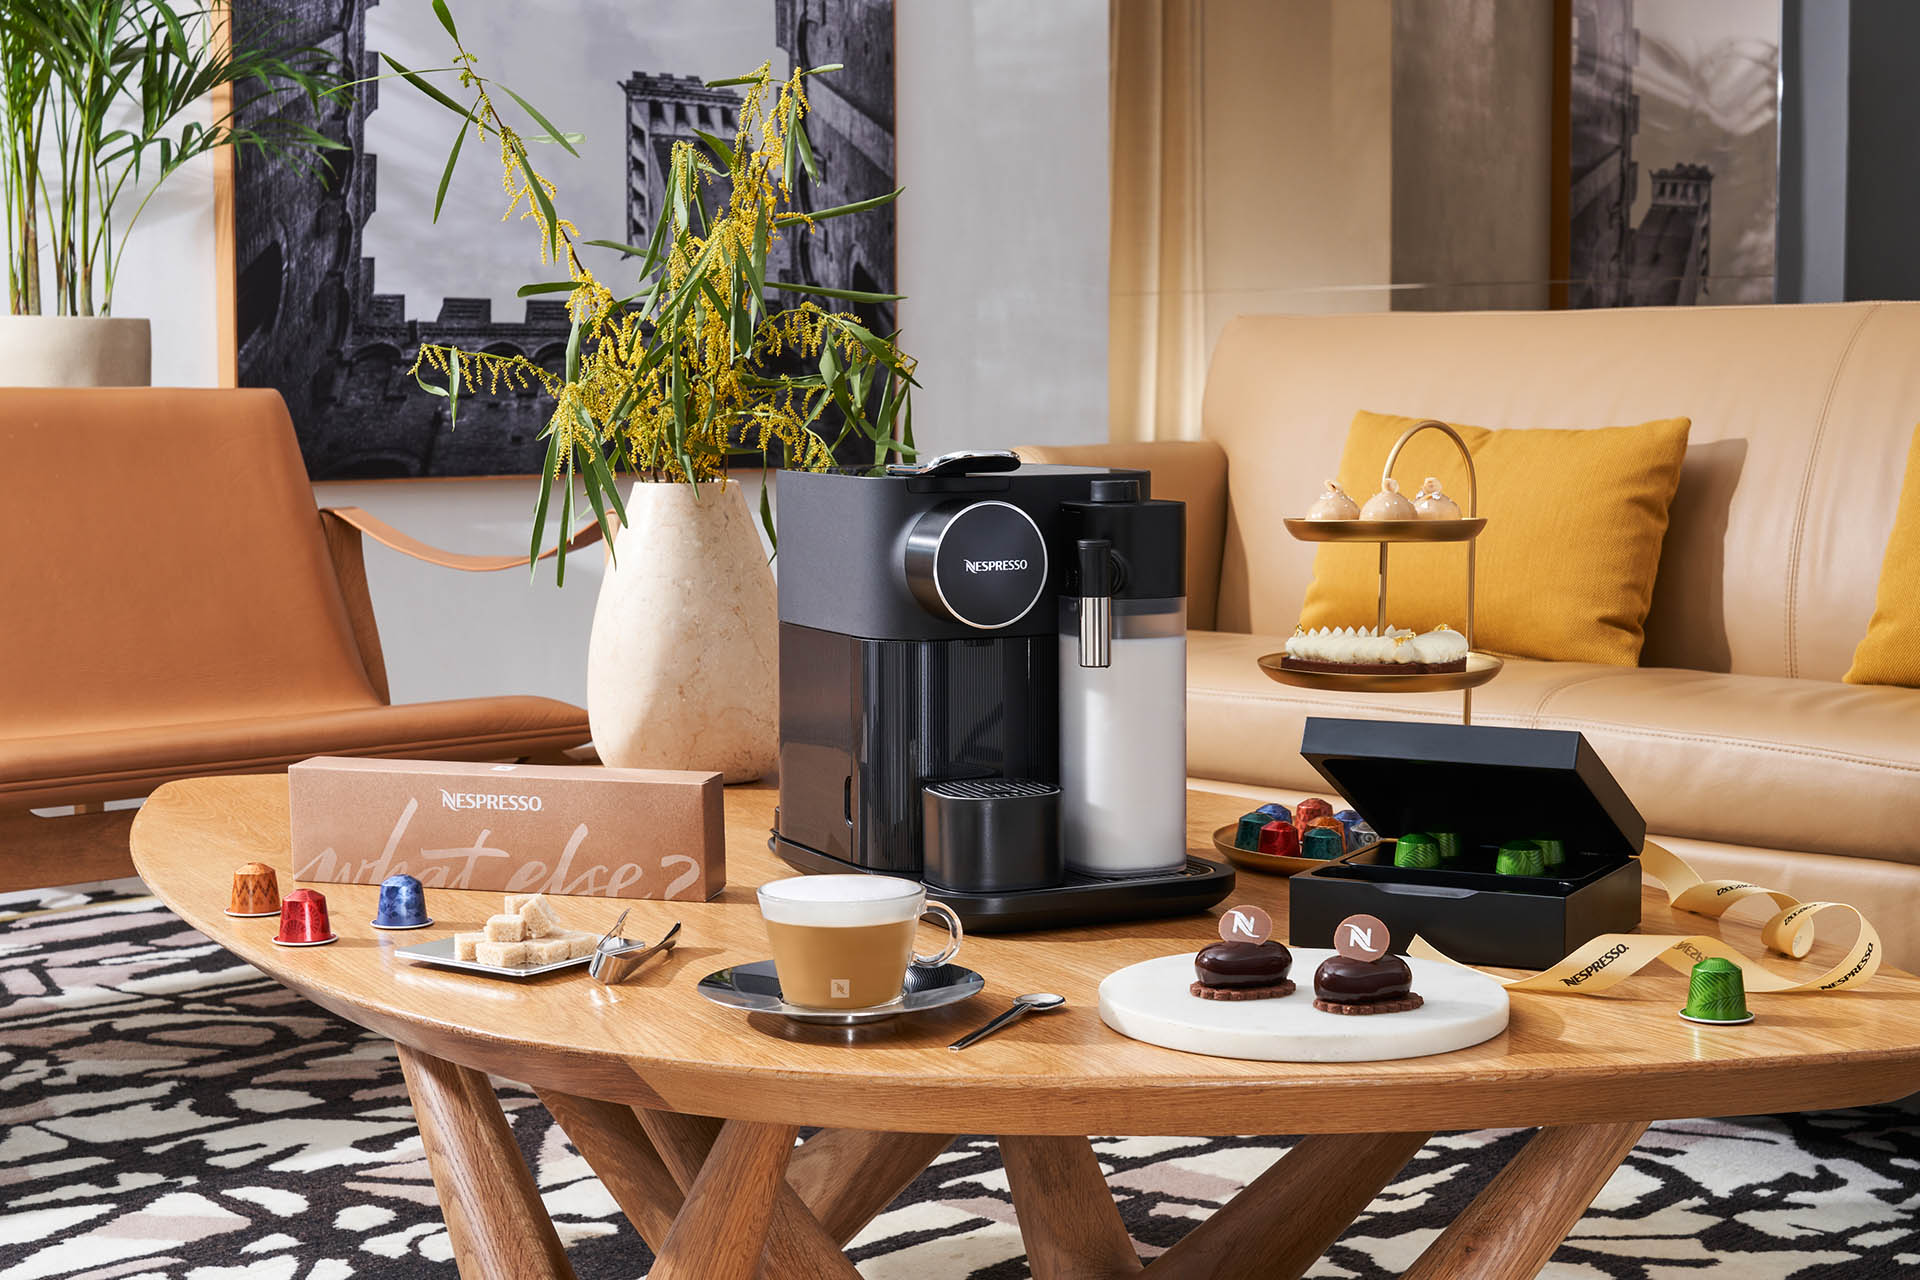 Nespresso Singapore on Instagram: Elevate coffee moments at home with  Nespresso Vertuo Next. Enjoy a range of cafe-inspired coffee styles  anytime, simply at the touch of a button. Learn more at the